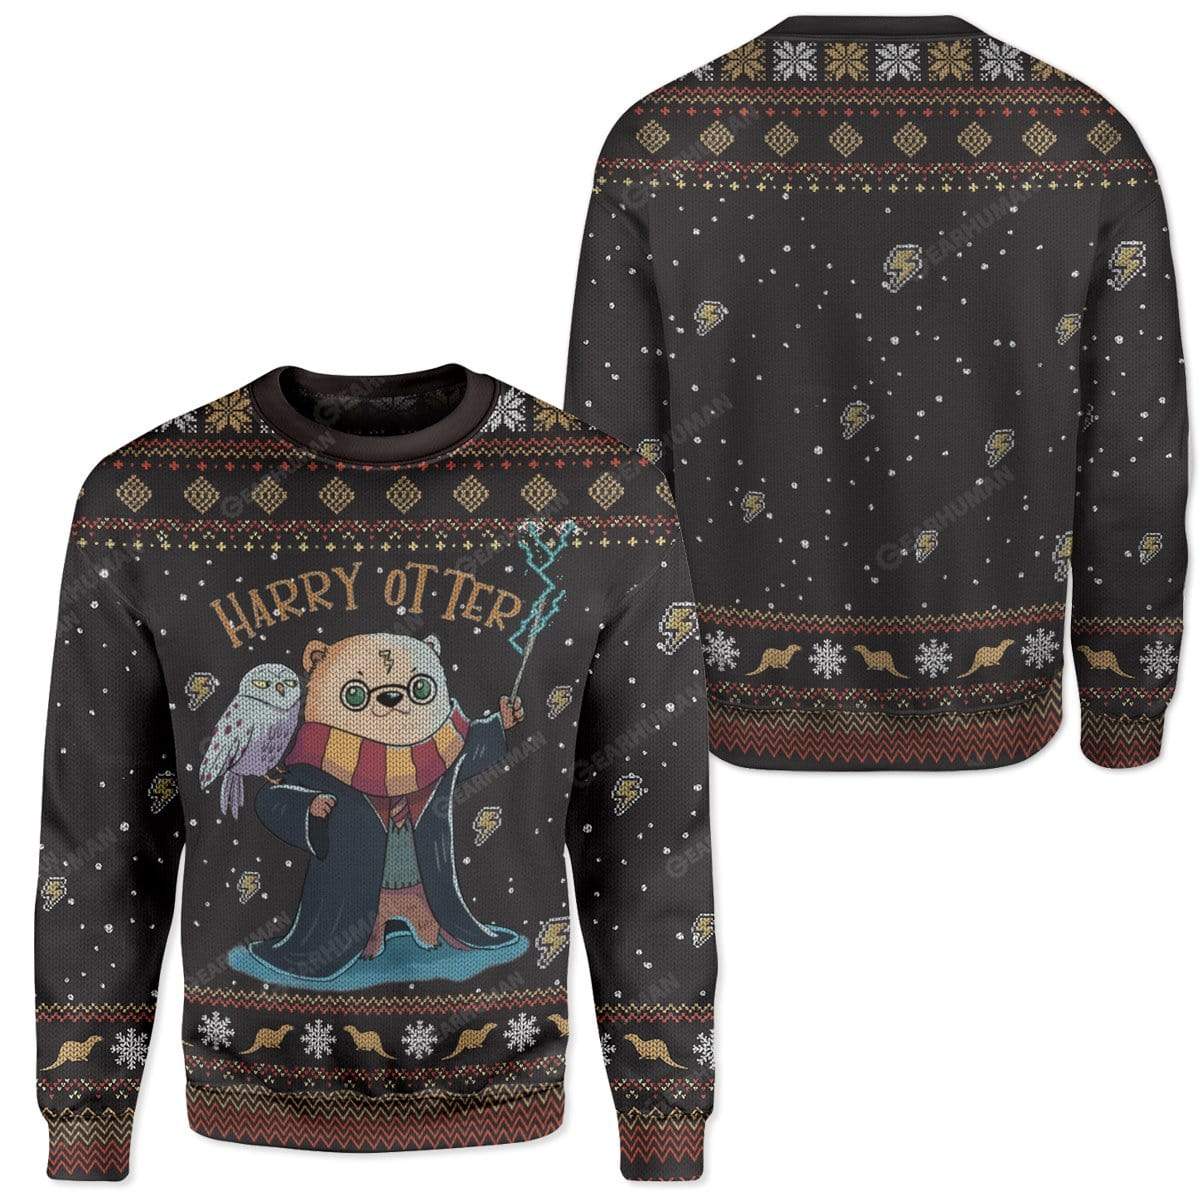 Ugly Harry Otter Custom Sweater Apparel HD-AT18111906 Ugly Christmas Sweater 